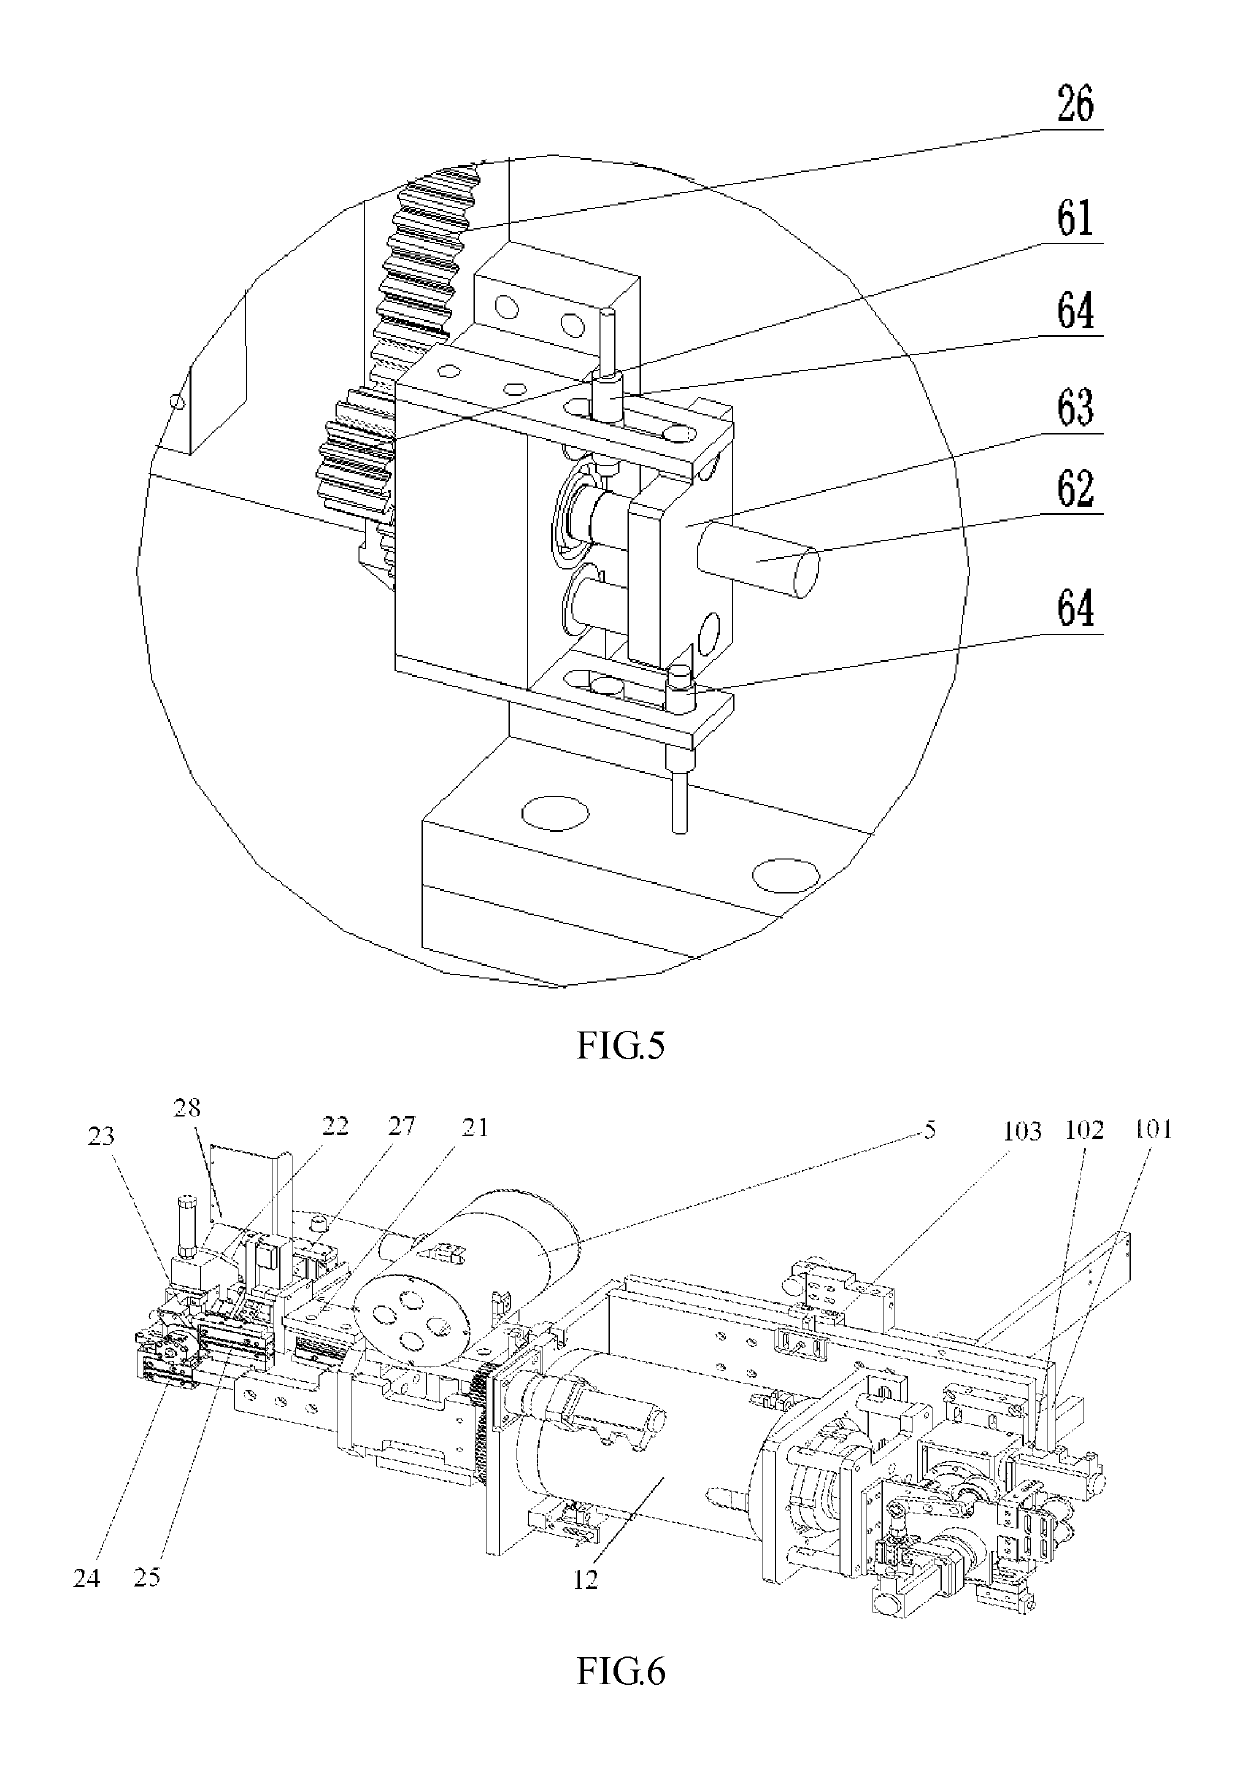 Apparatus for pasting warm edge spacer